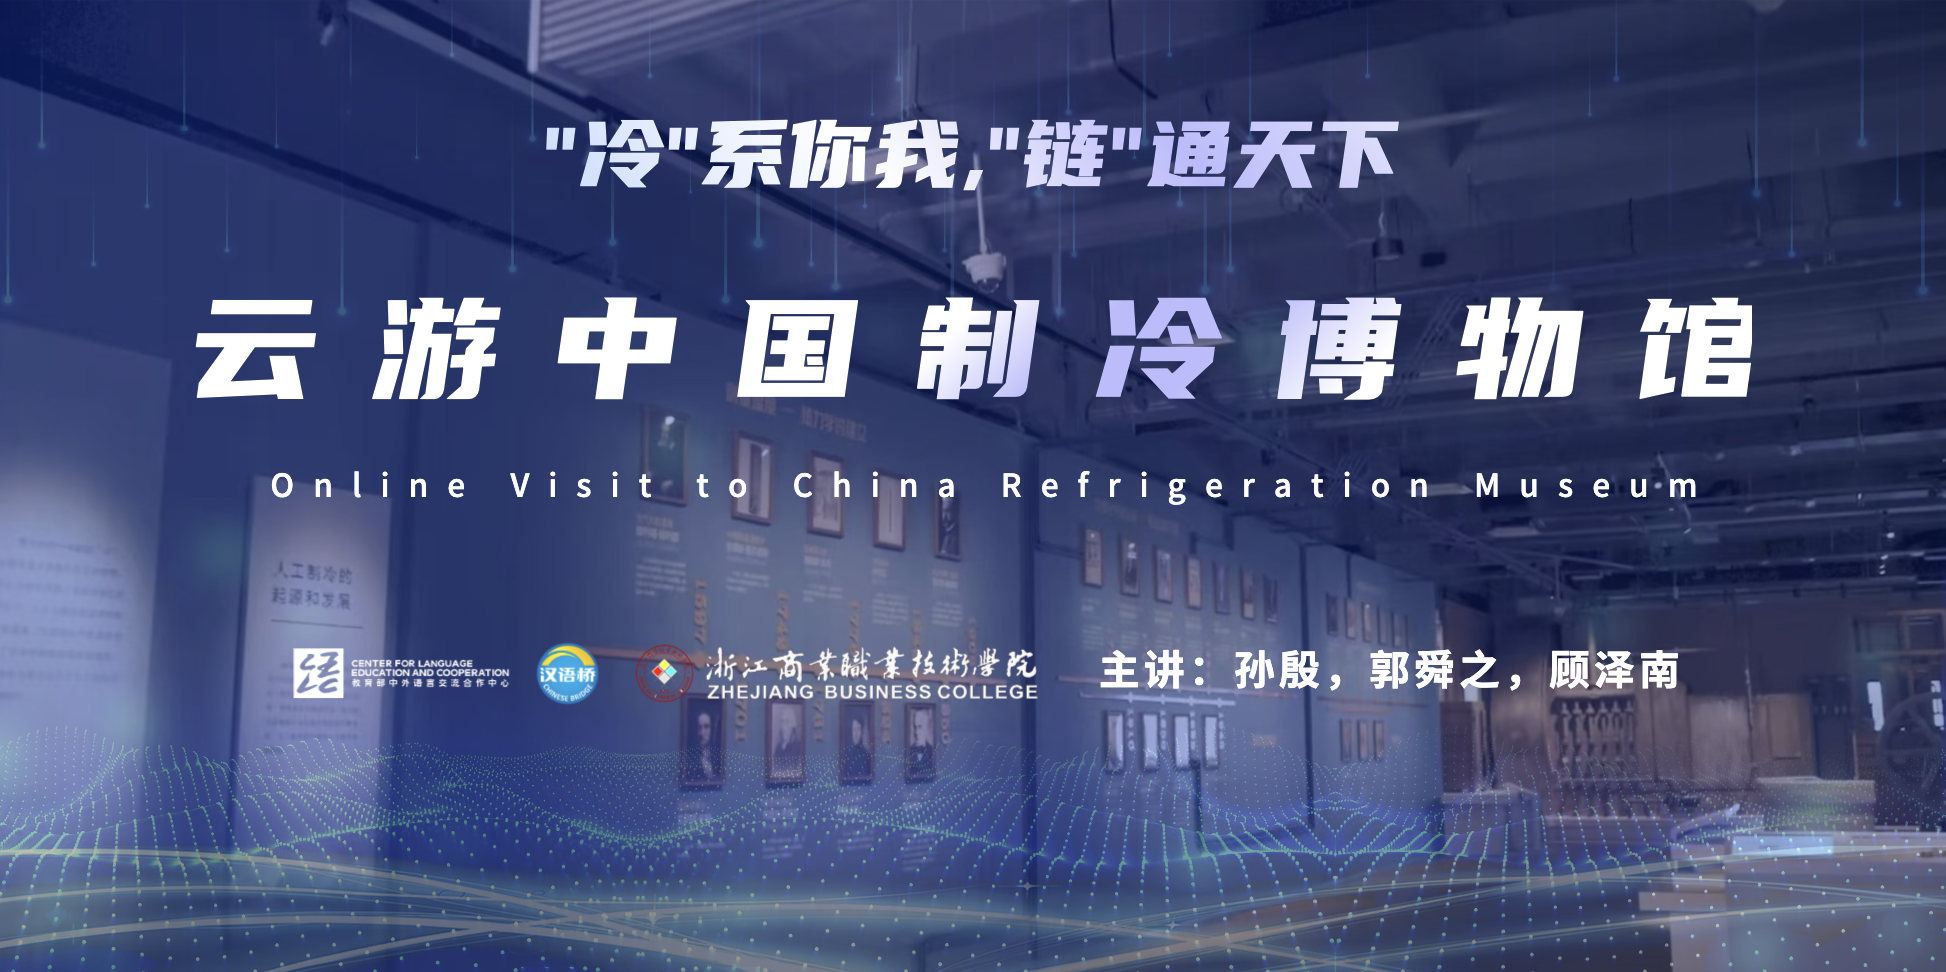 Online Visit to China Refrigeration Museum